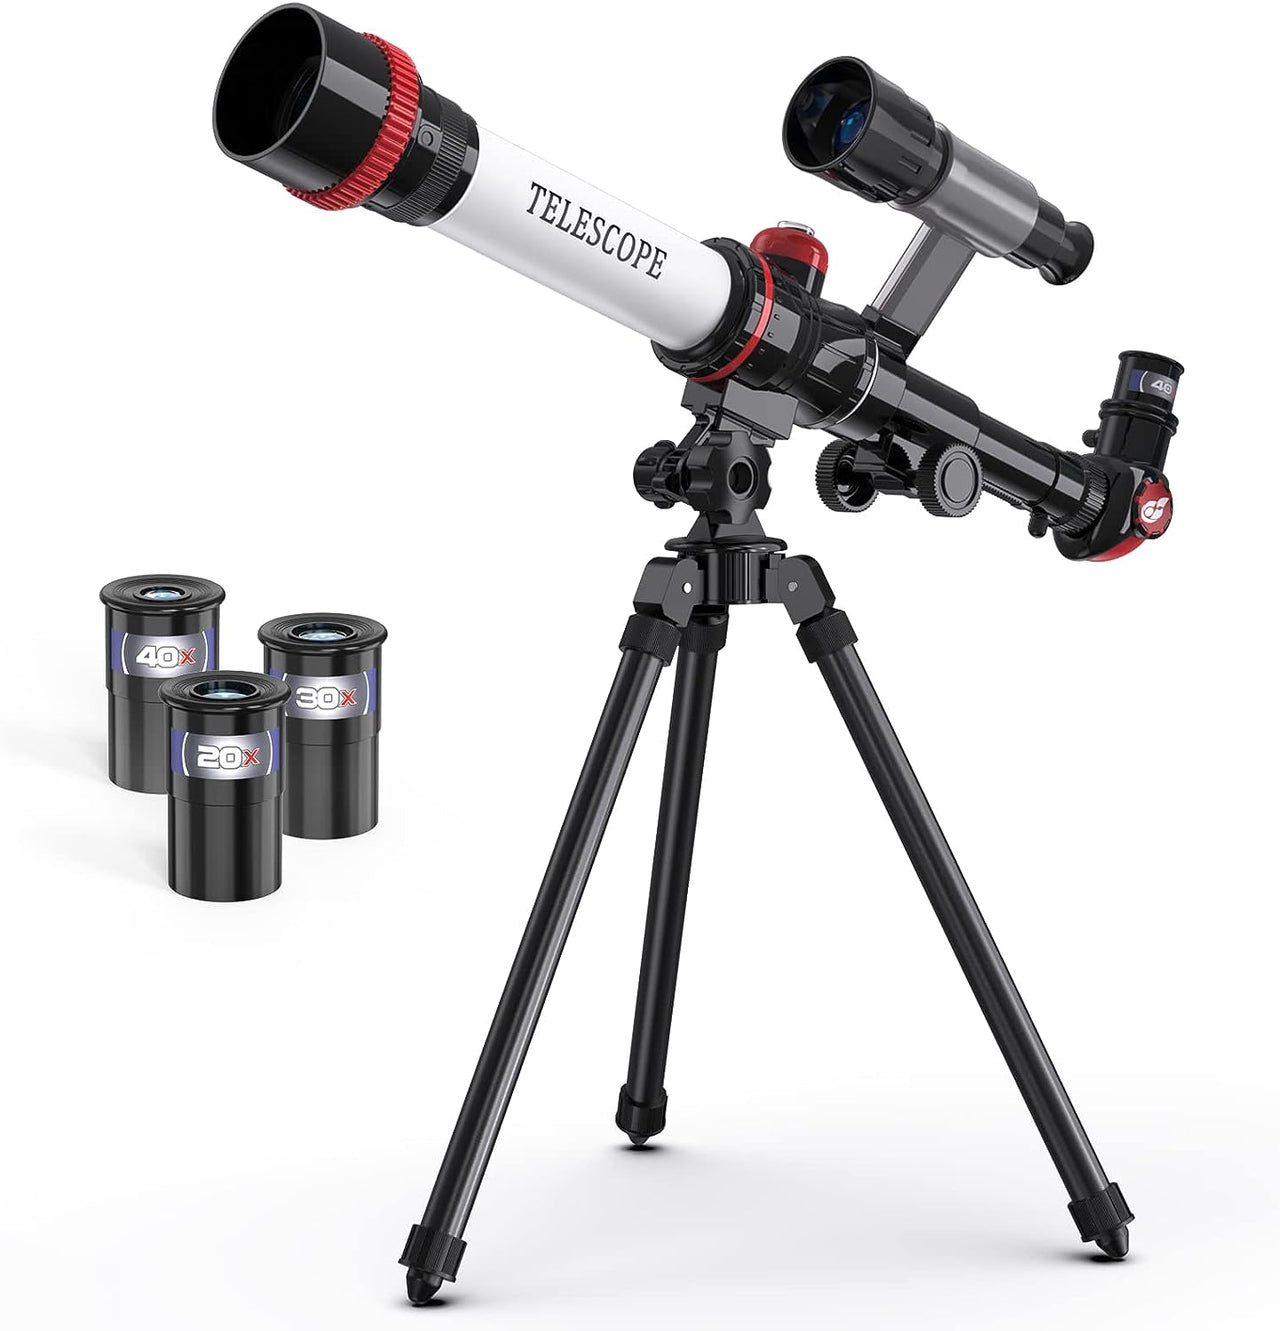 Science Discovery High Magnification Telescope